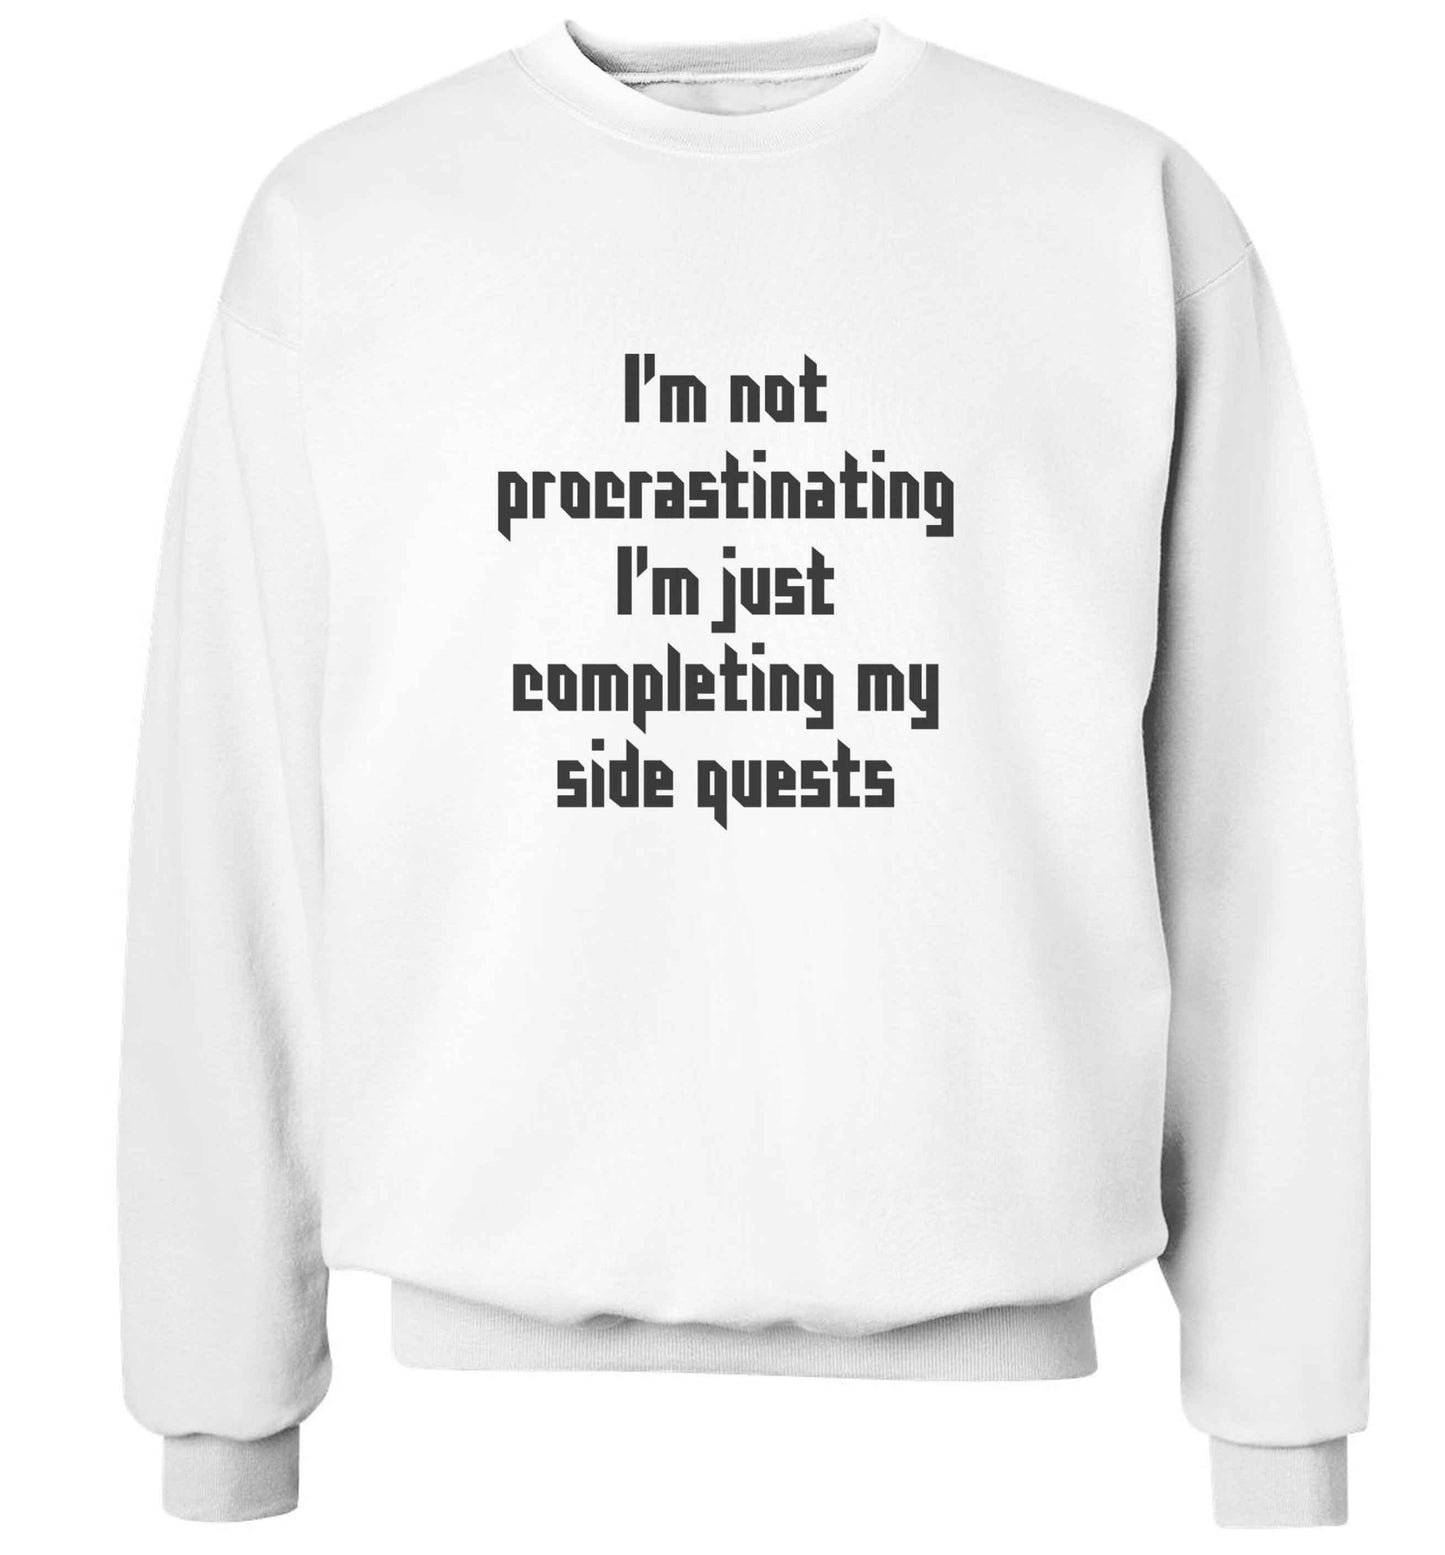 I'm not procrastinating I'm just completing my side quests adult's unisex white sweater 2XL